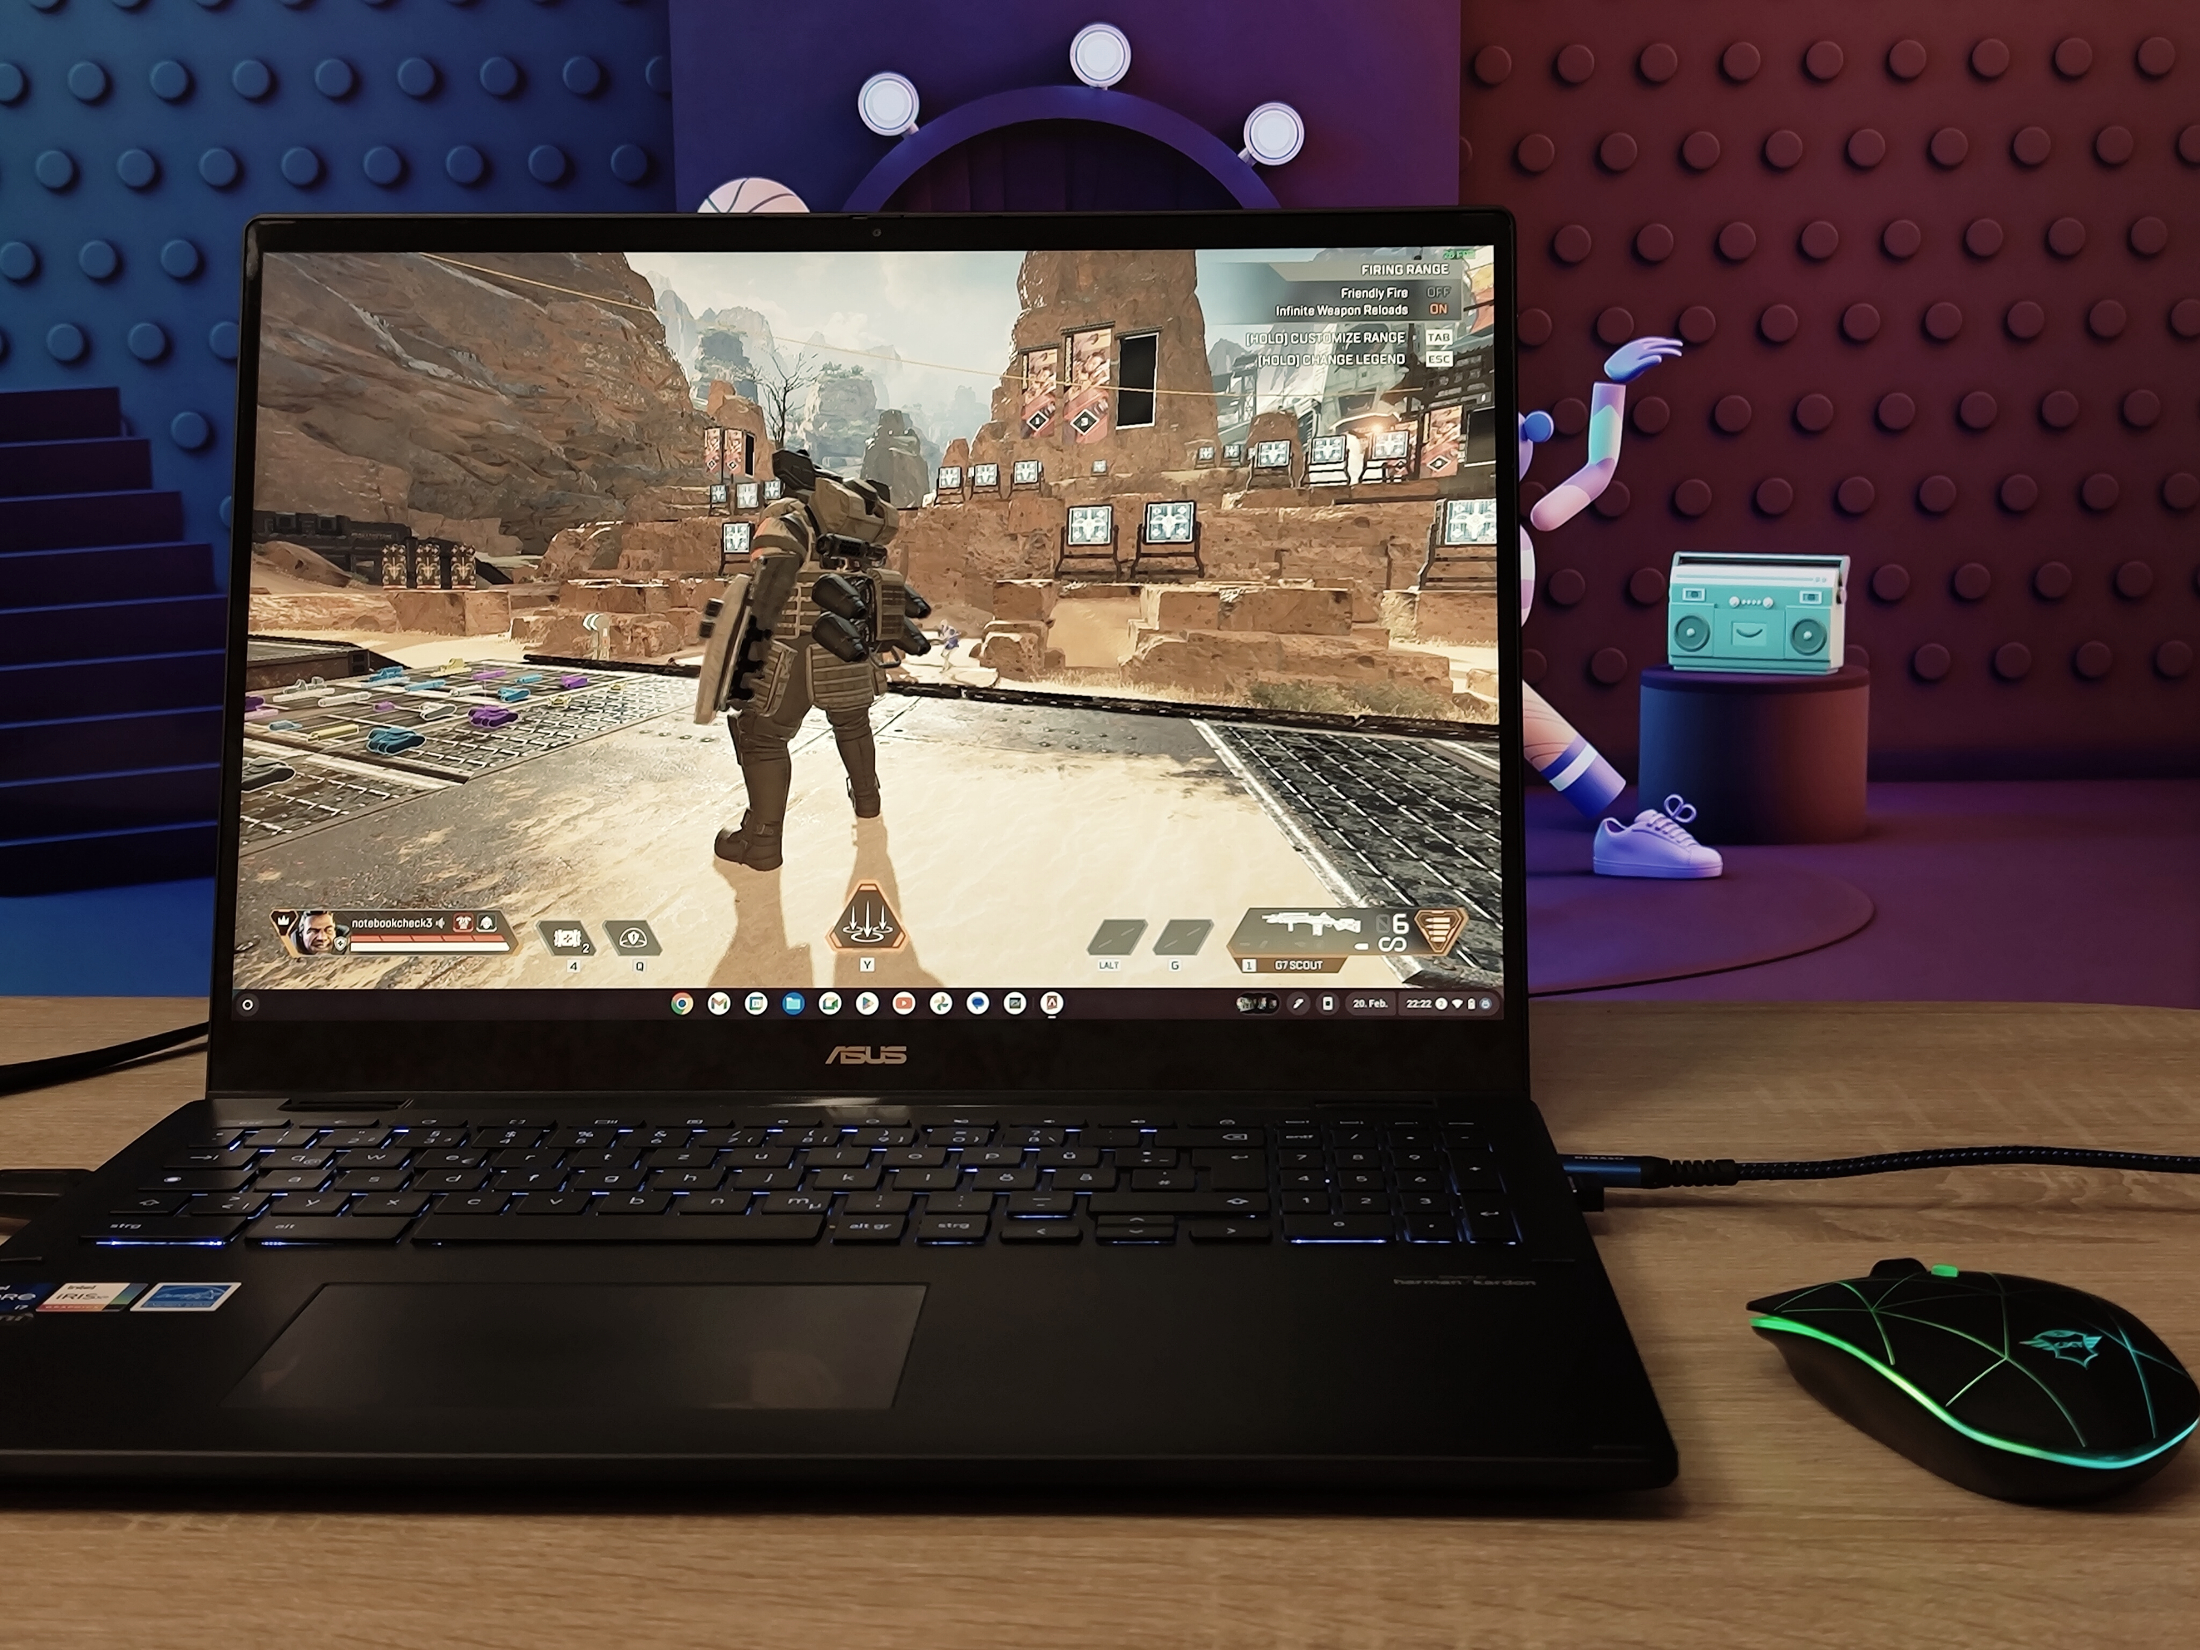 Games on Chromebook – Steam Beta tested with several existing games